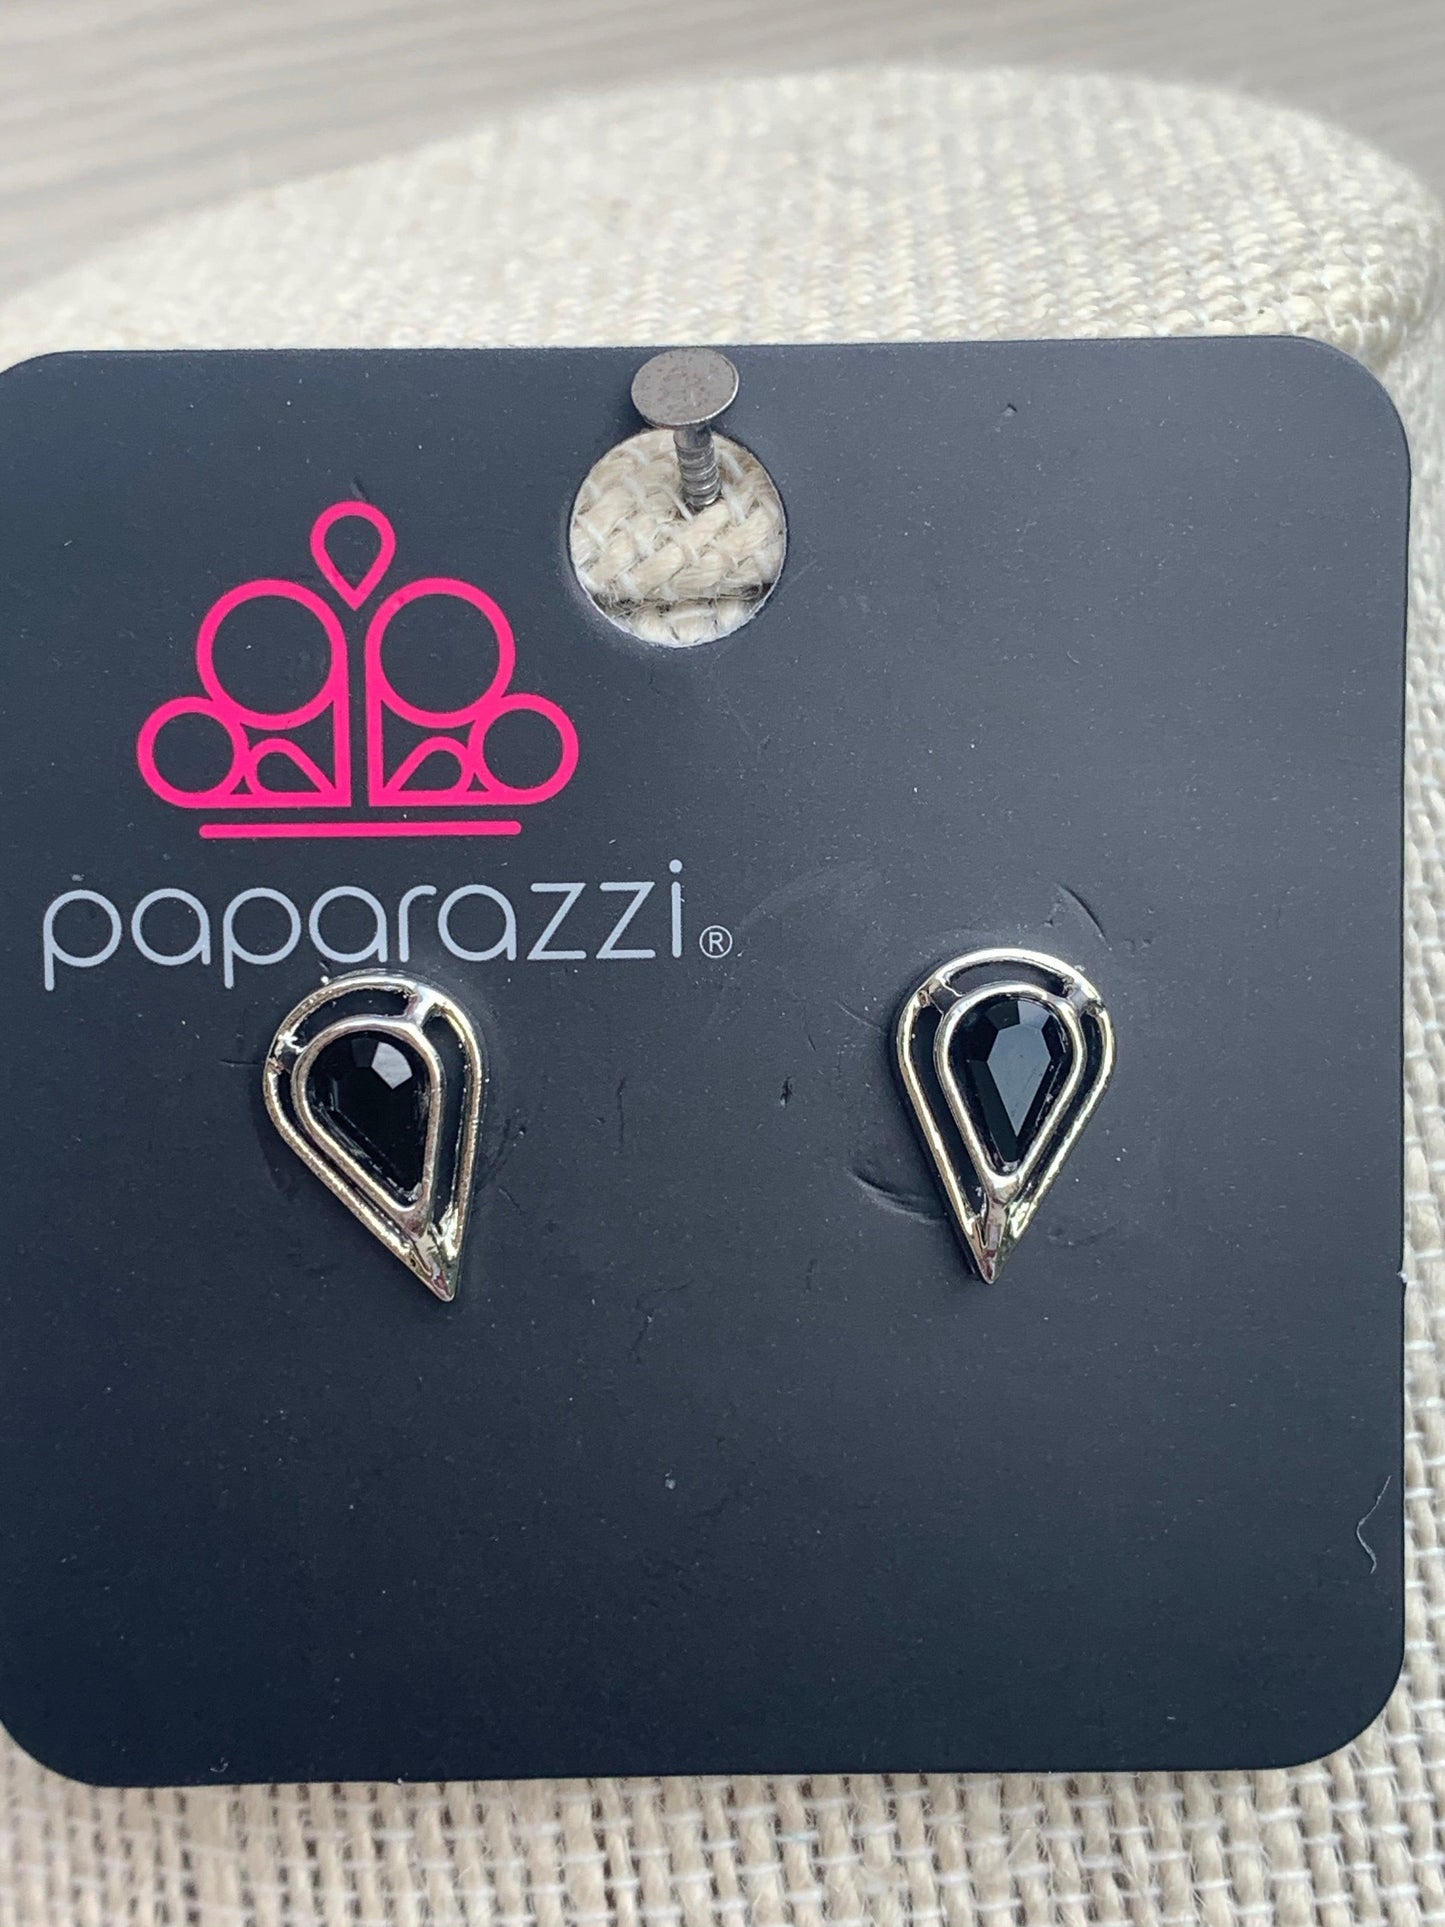 Paparazzi Accessories Starlet Shimmer Earrings: #4 - Black Black Earrings ONLY *Color Not Shown Jewelry